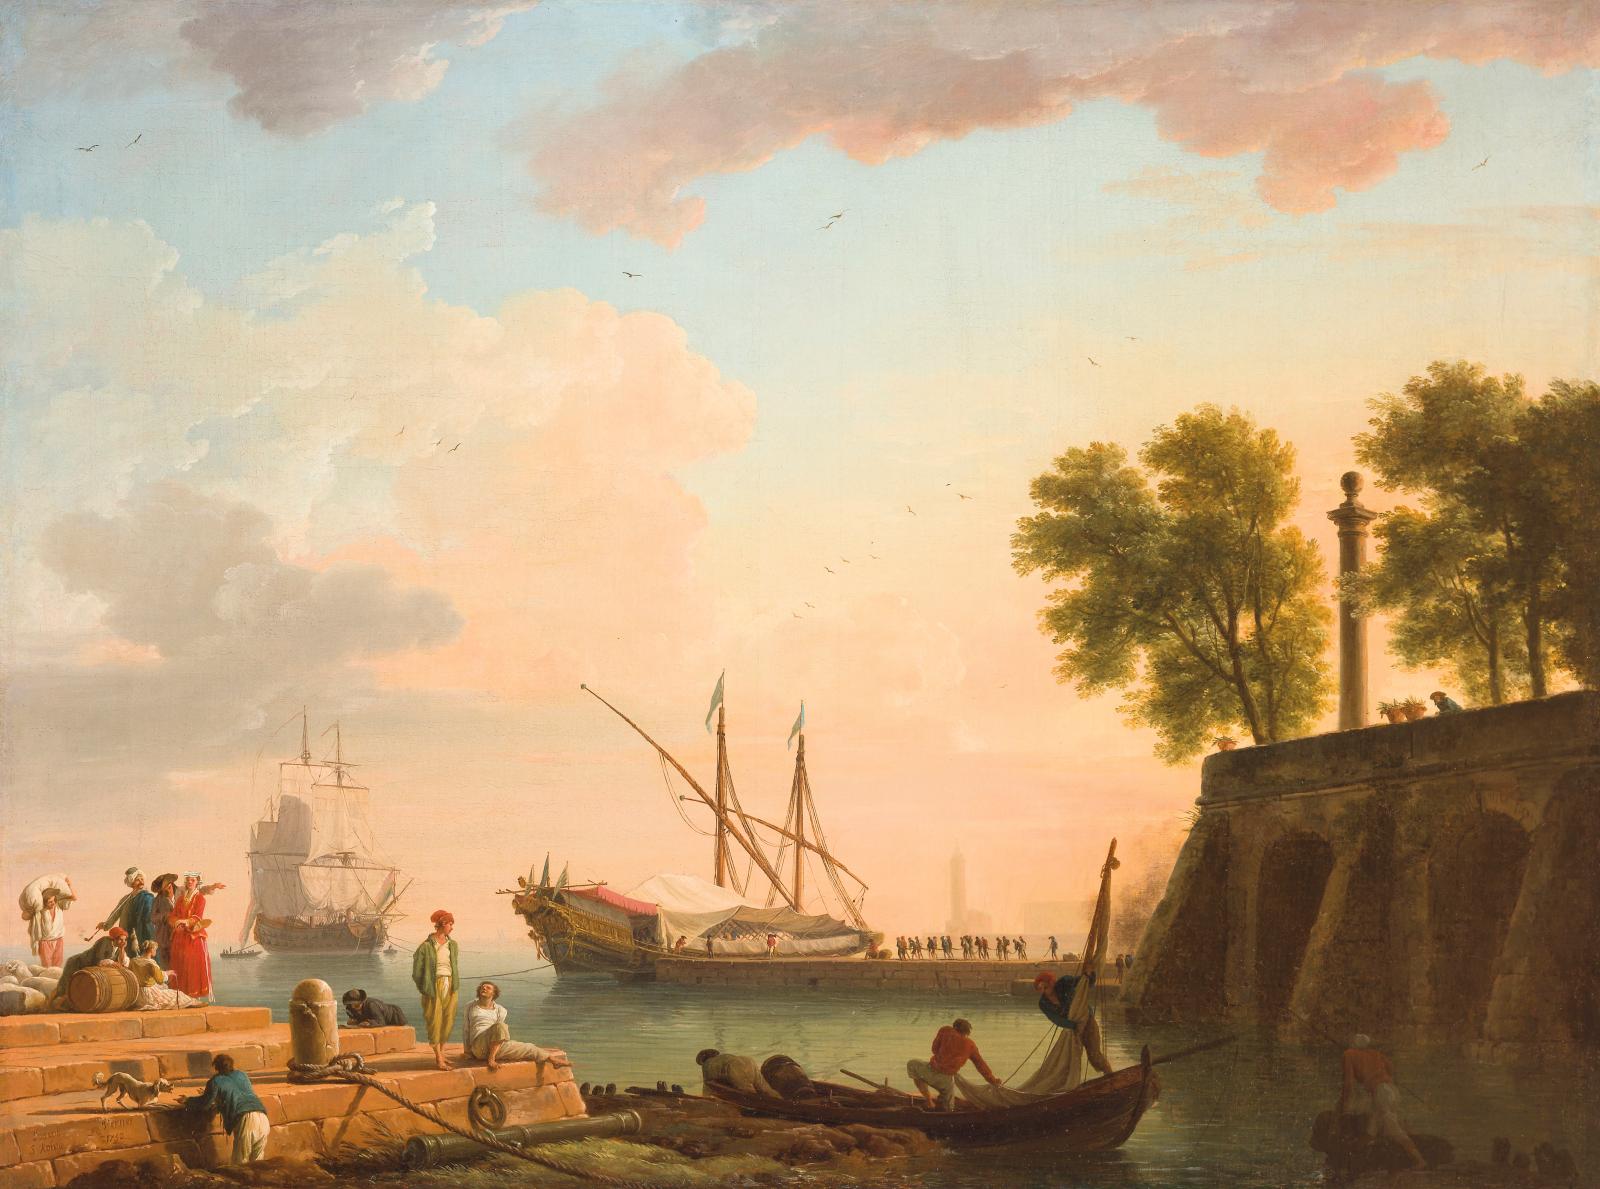 Naples Resurfaces: A Rediscovered Piece by Joseph Vernet